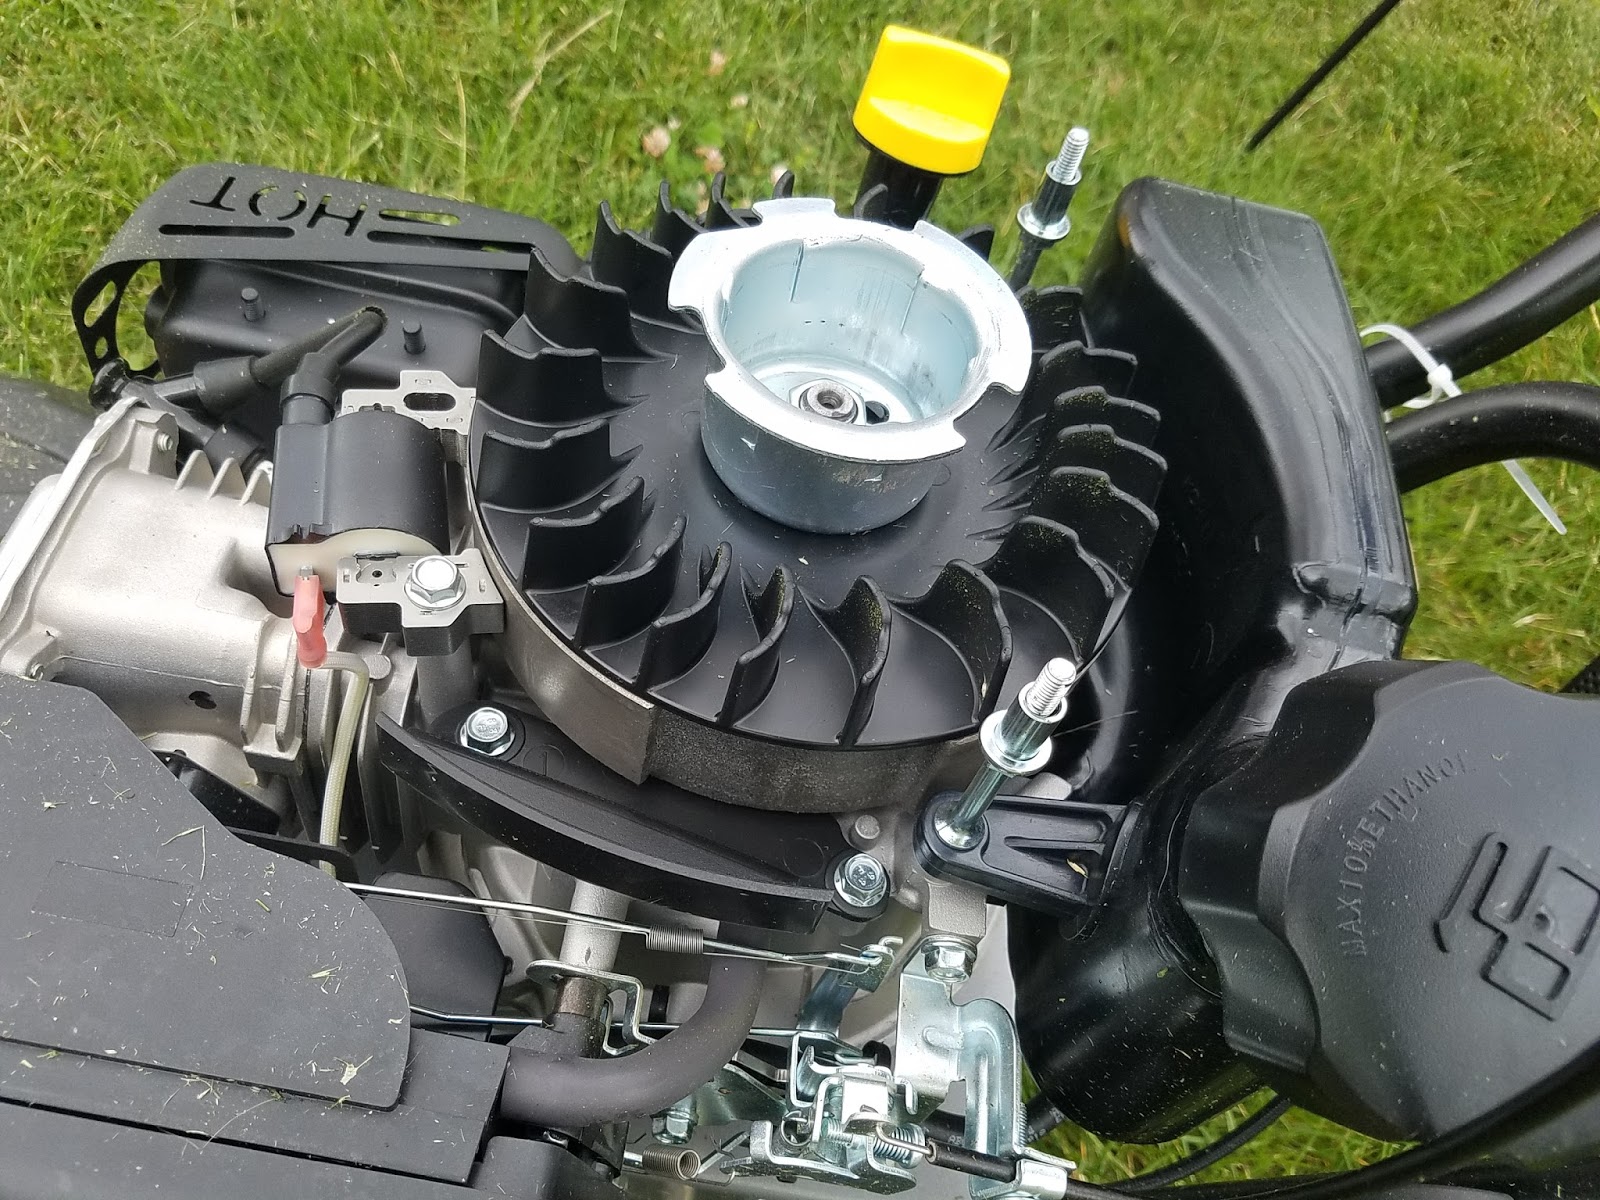 How to Tell If Riding Mower Engine is Locked Up